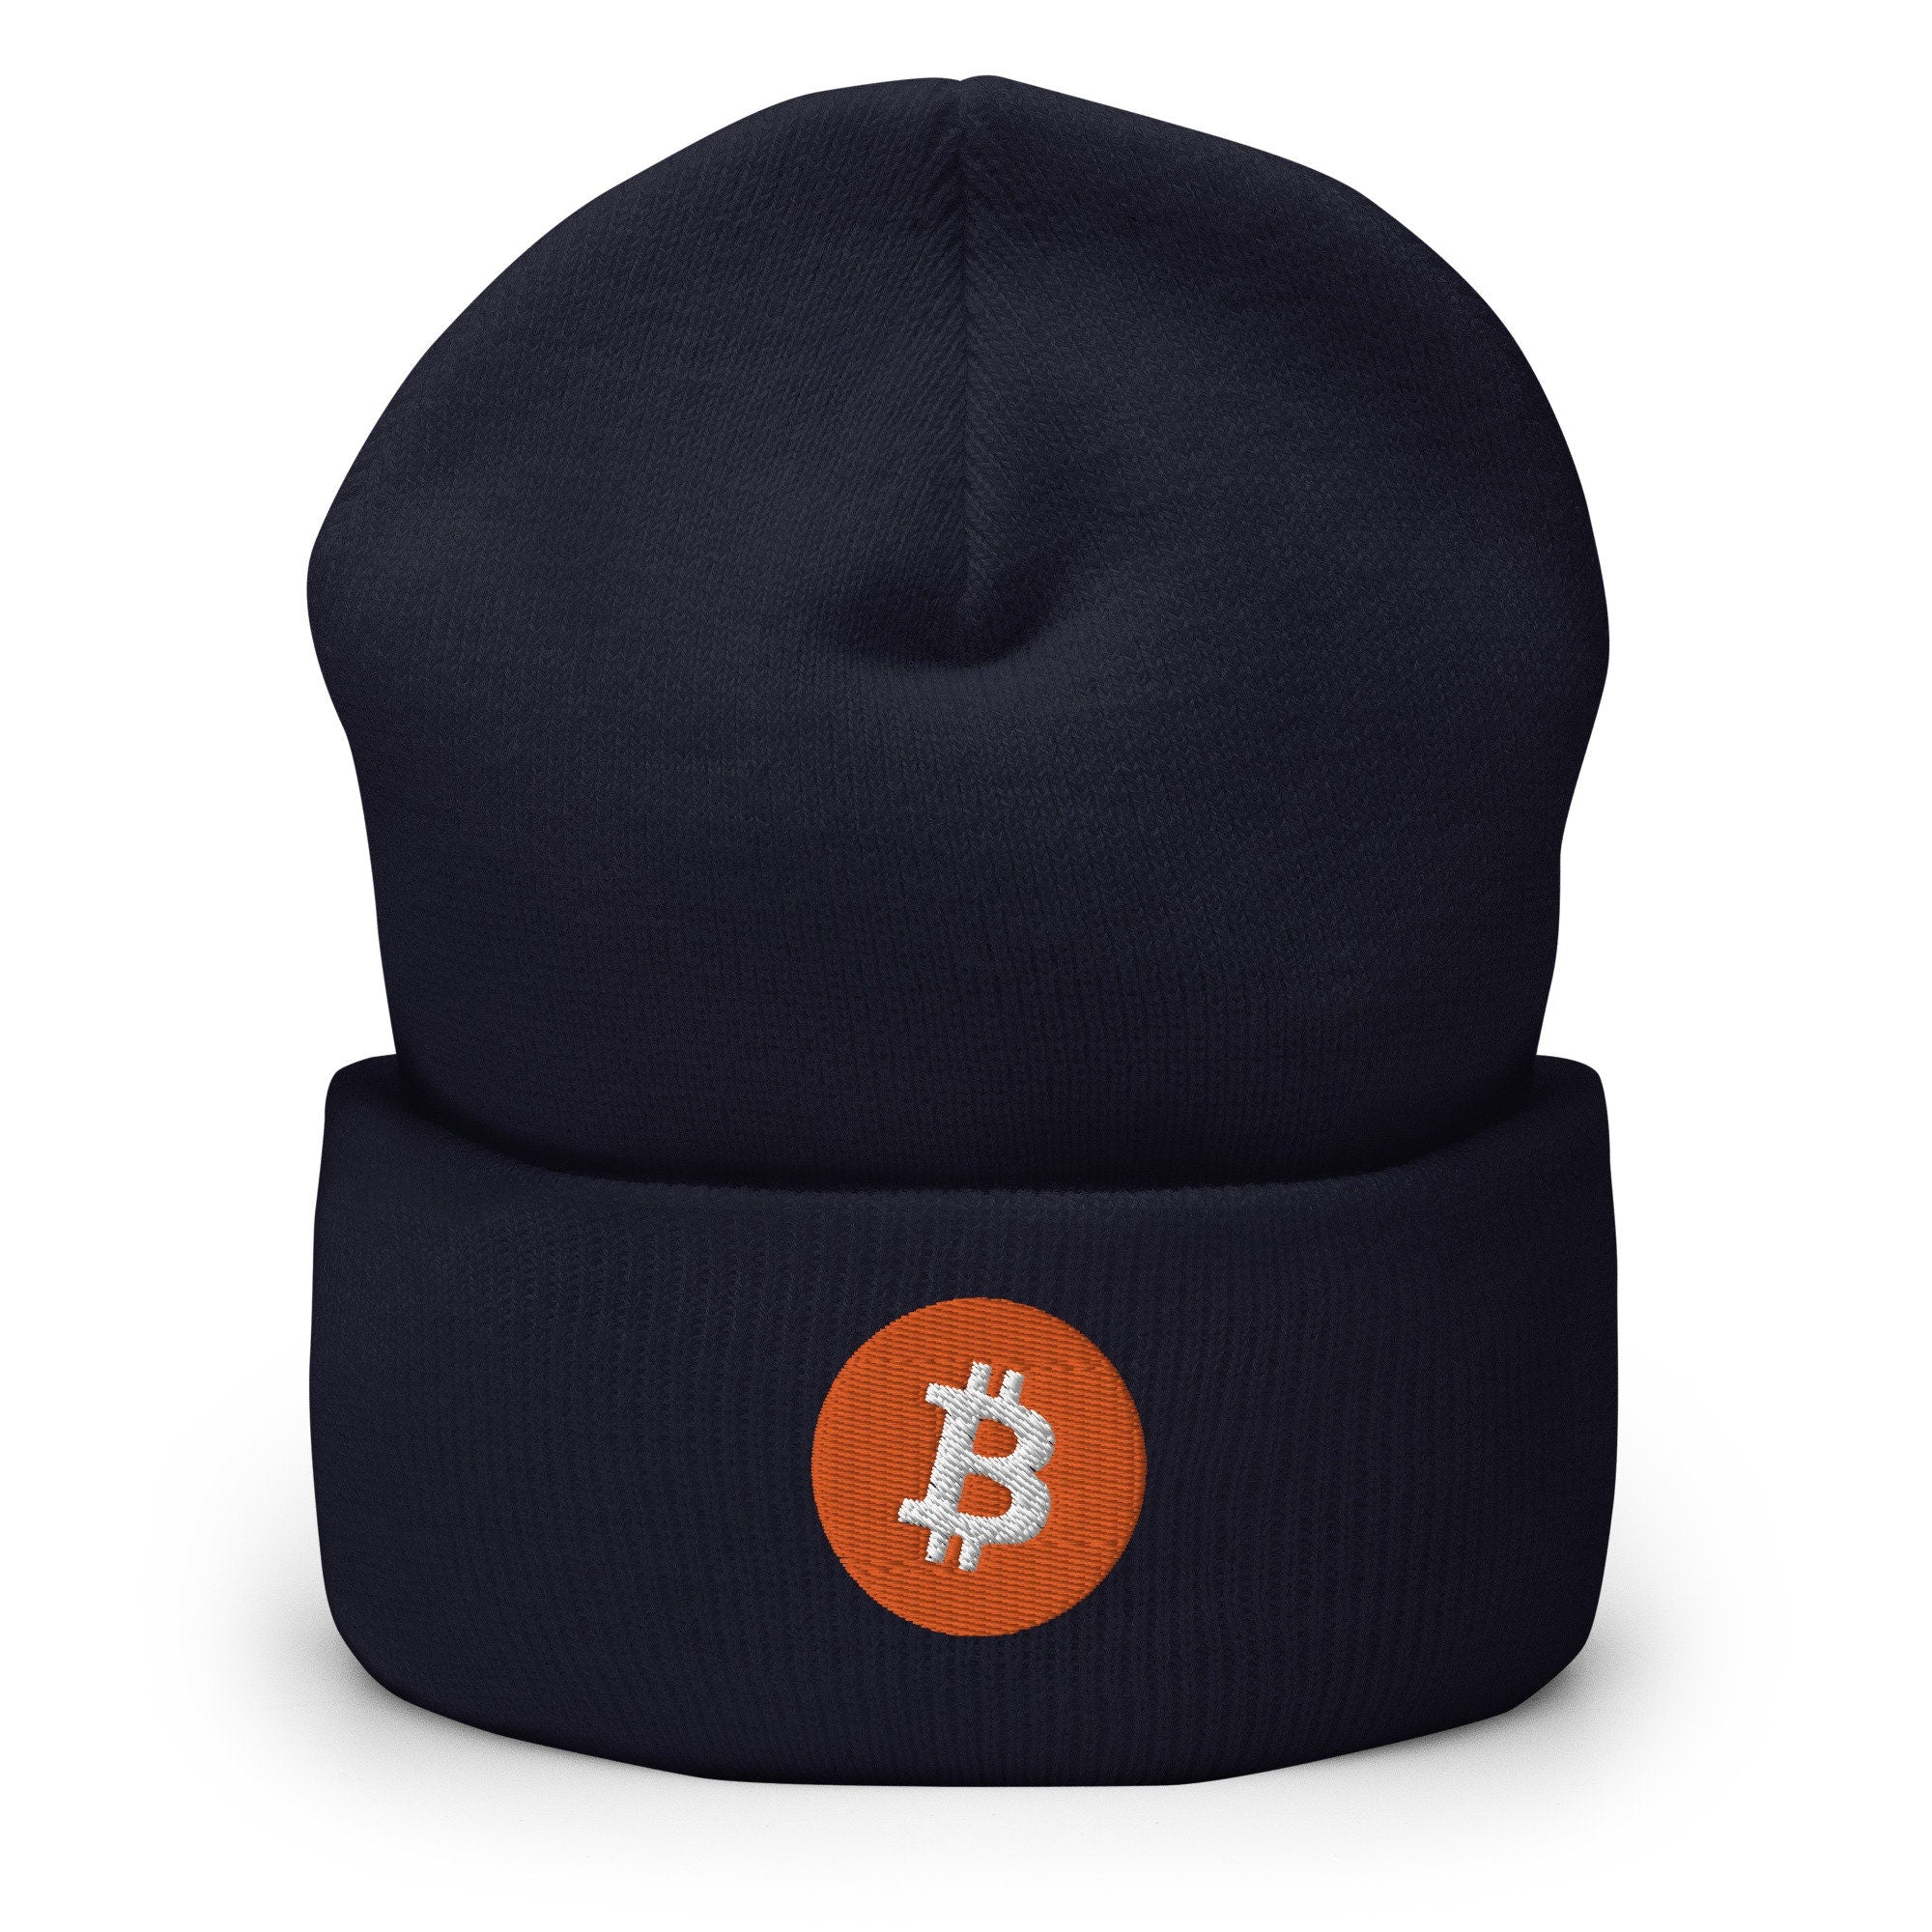 Bitcoin Cryptocurrency Blockchain Icon Embroidered Beanie, Handmade Cuffed Knit Unisex Slouchy Adult Winter Hat Cap Gift